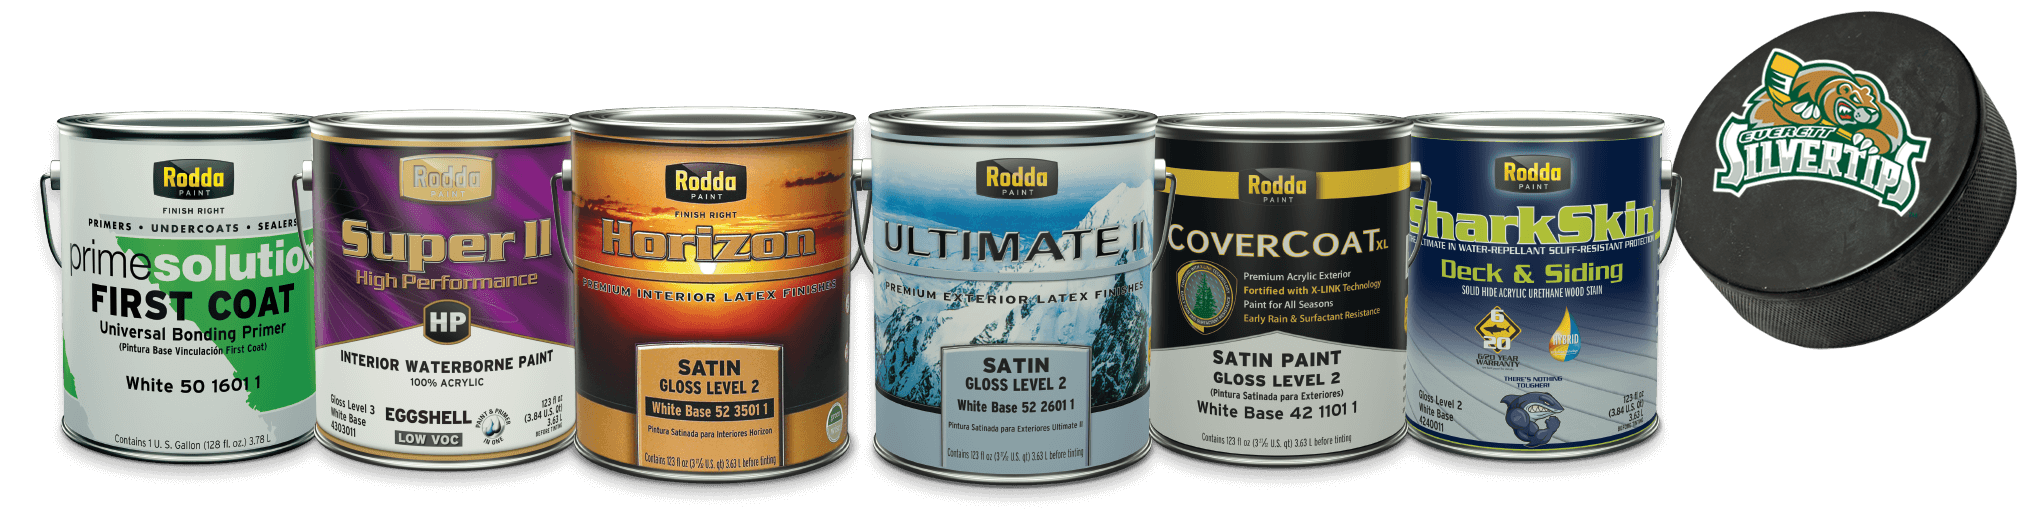 Save up to 30% on Rodda Paints and various Paint Accessories!